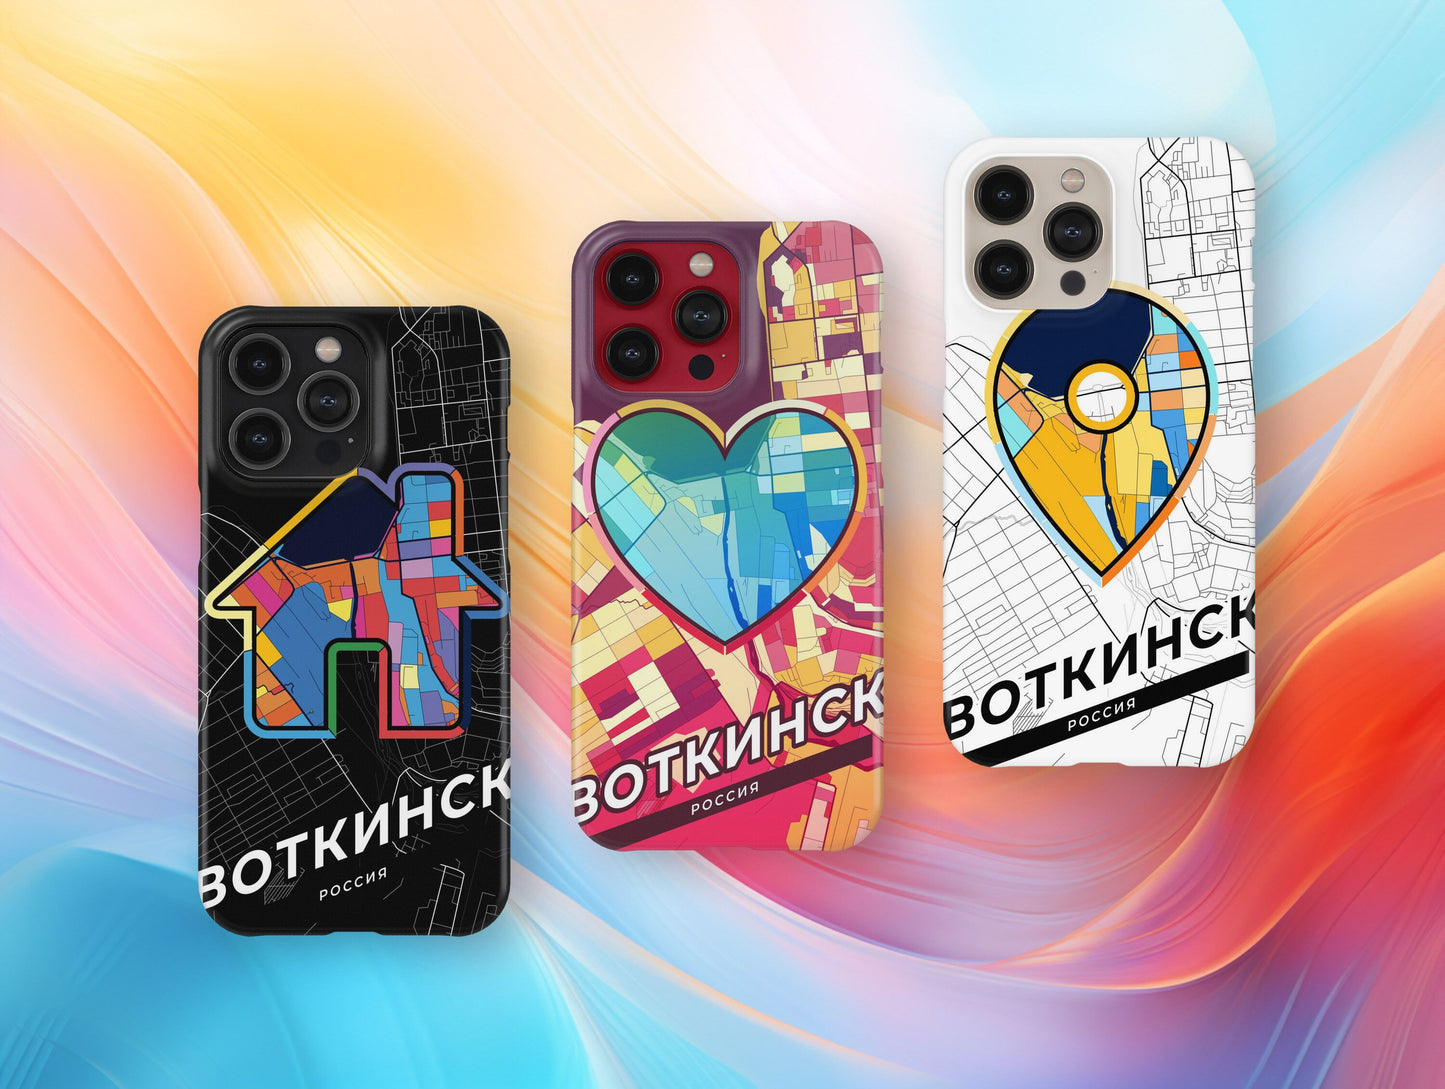 Votkinsk Russia slim phone case with colorful icon